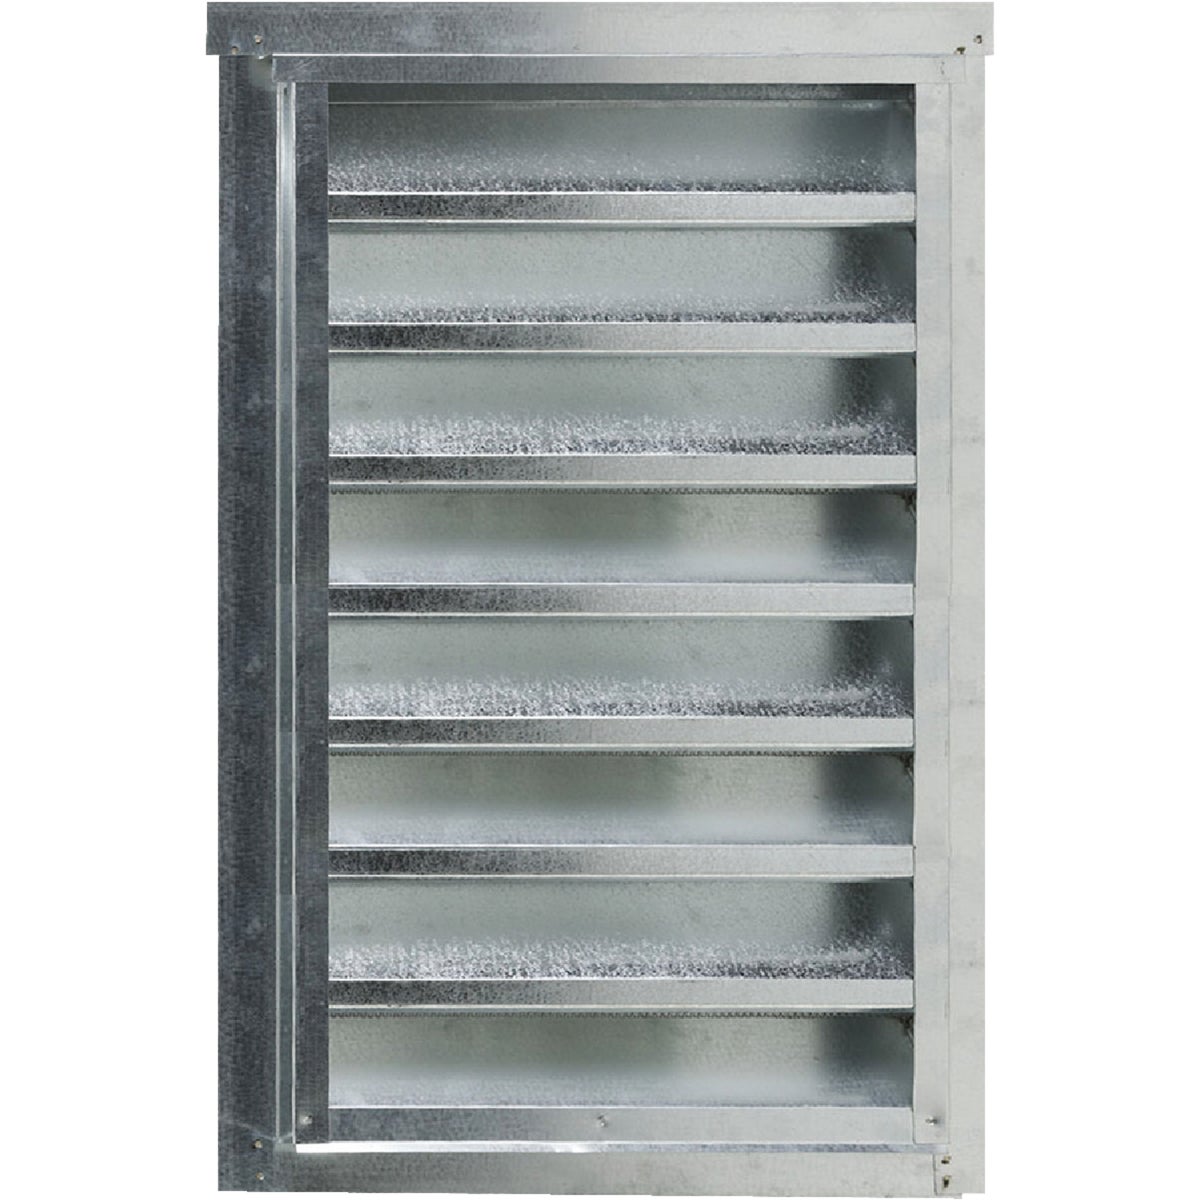 Item 111783, A gable vent improves ventilation and airflow in an attic.